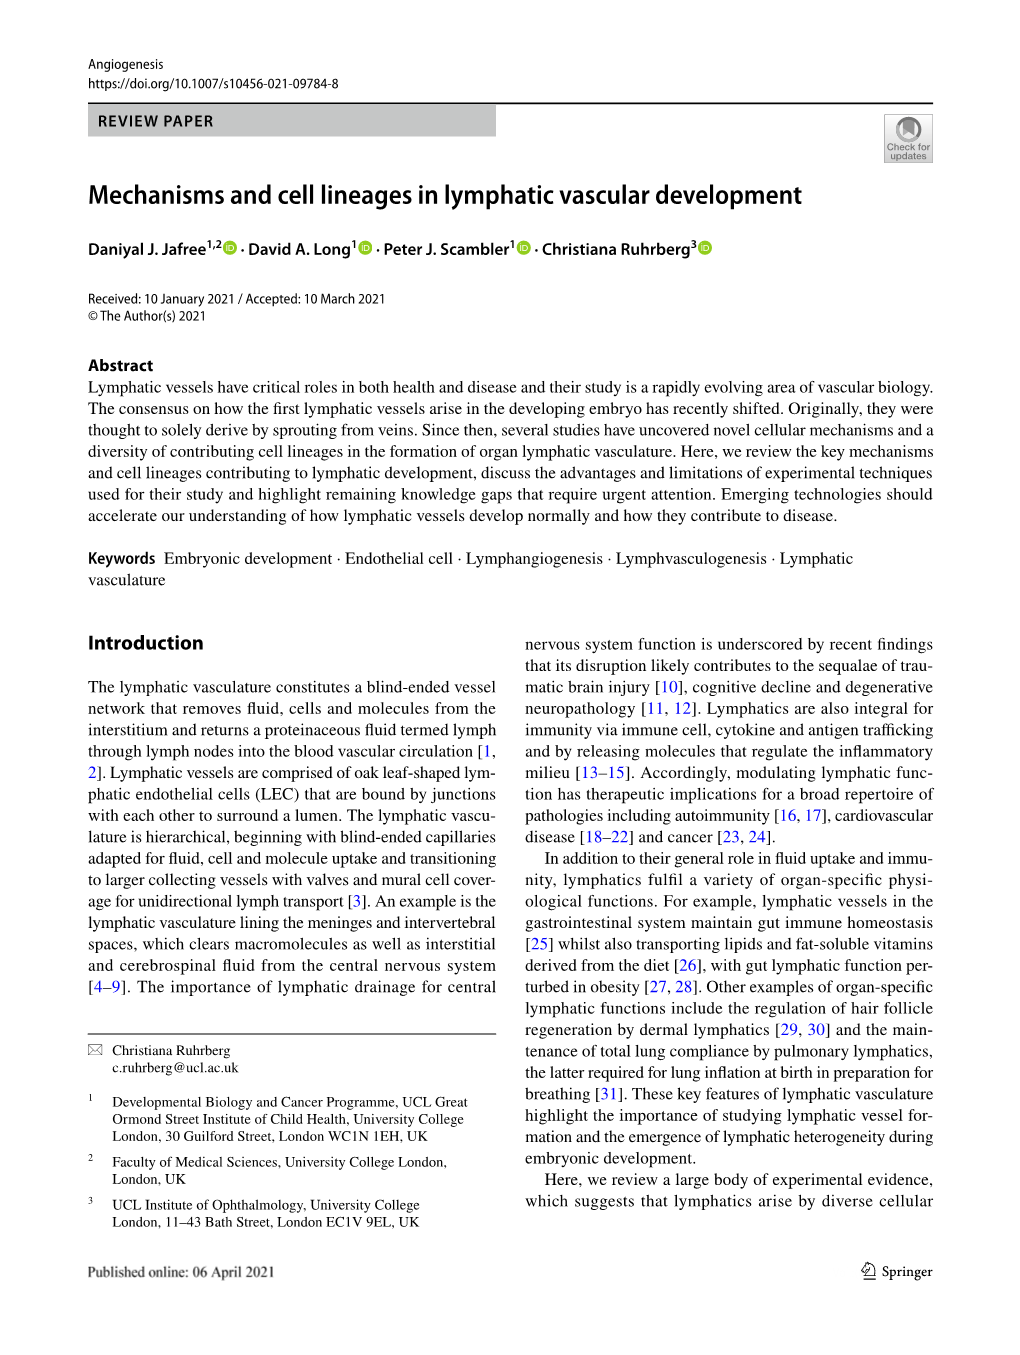 Mechanisms and Cell Lineages in Lymphatic Vascular Development